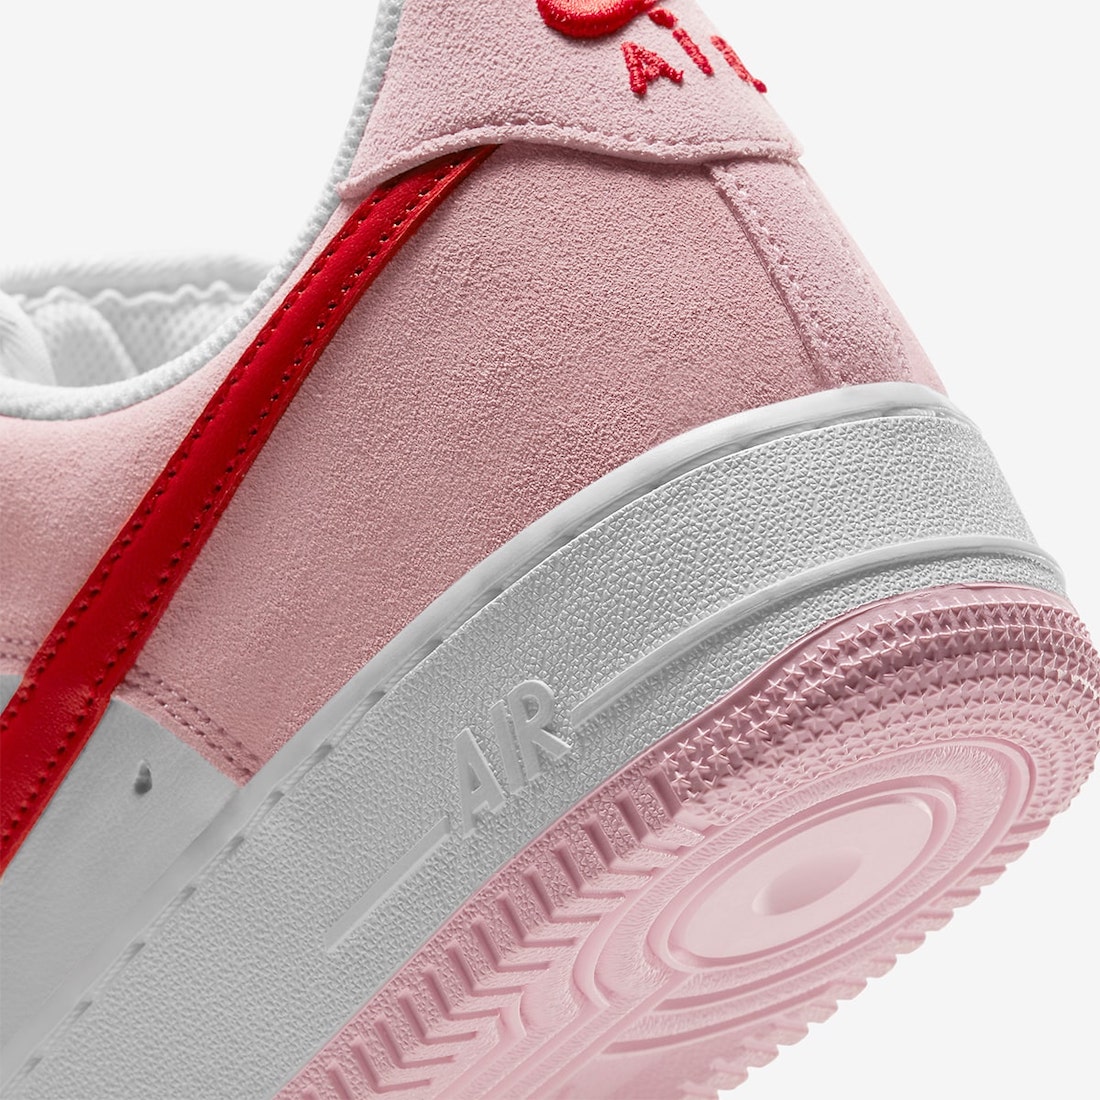 Nike Air Force 1 Low Valentine's Day DD3384-600 Release Date - SBD